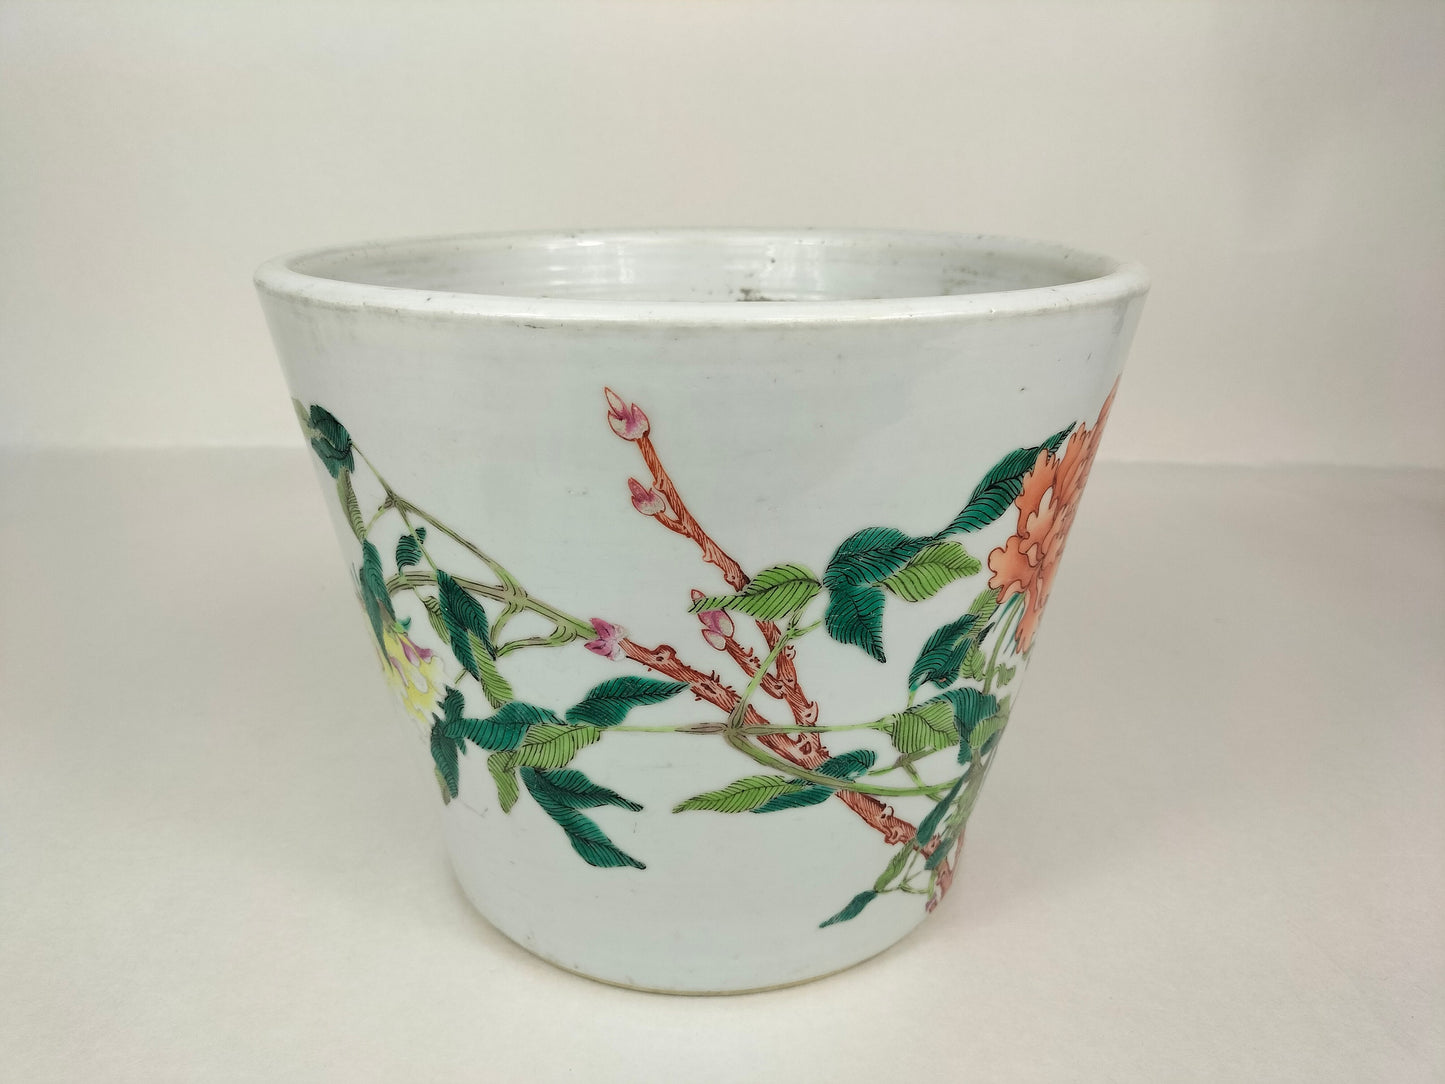 Antique Chinese famille rose planter decorated with flowers // Qing Dynasty - 19th century